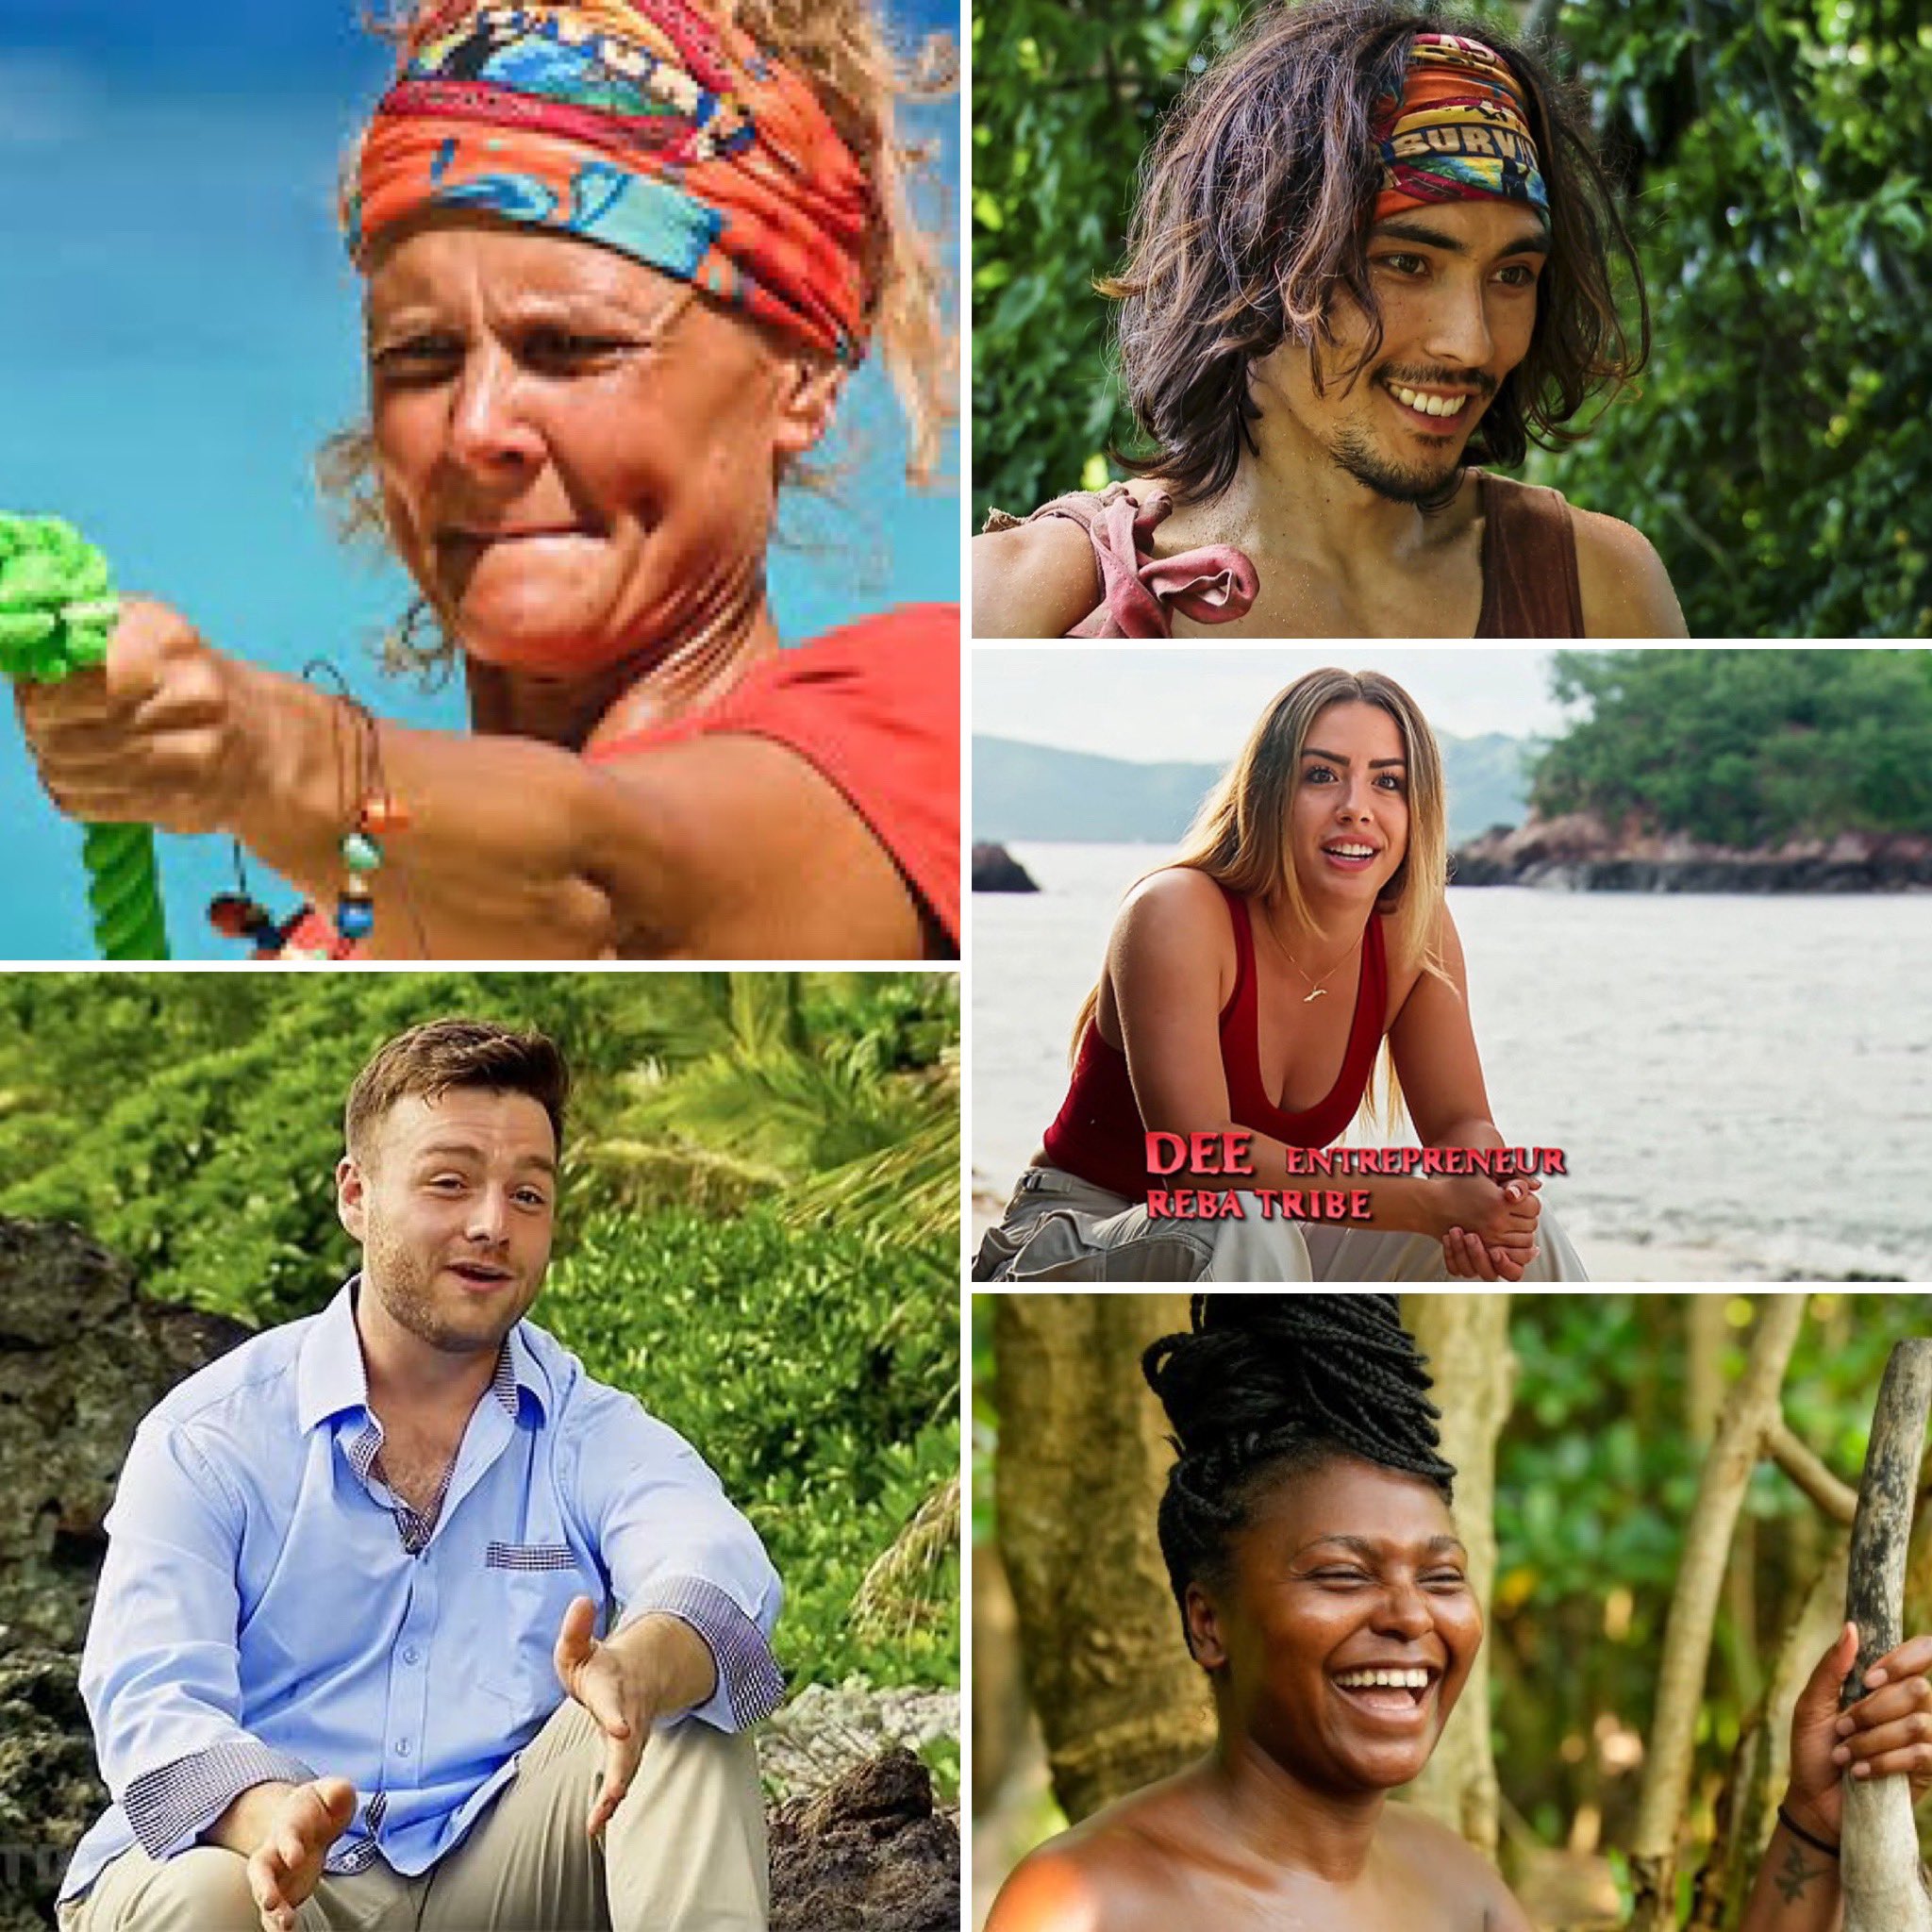 SurvivorQuotesX on X: Like and RT if you're excited for the start